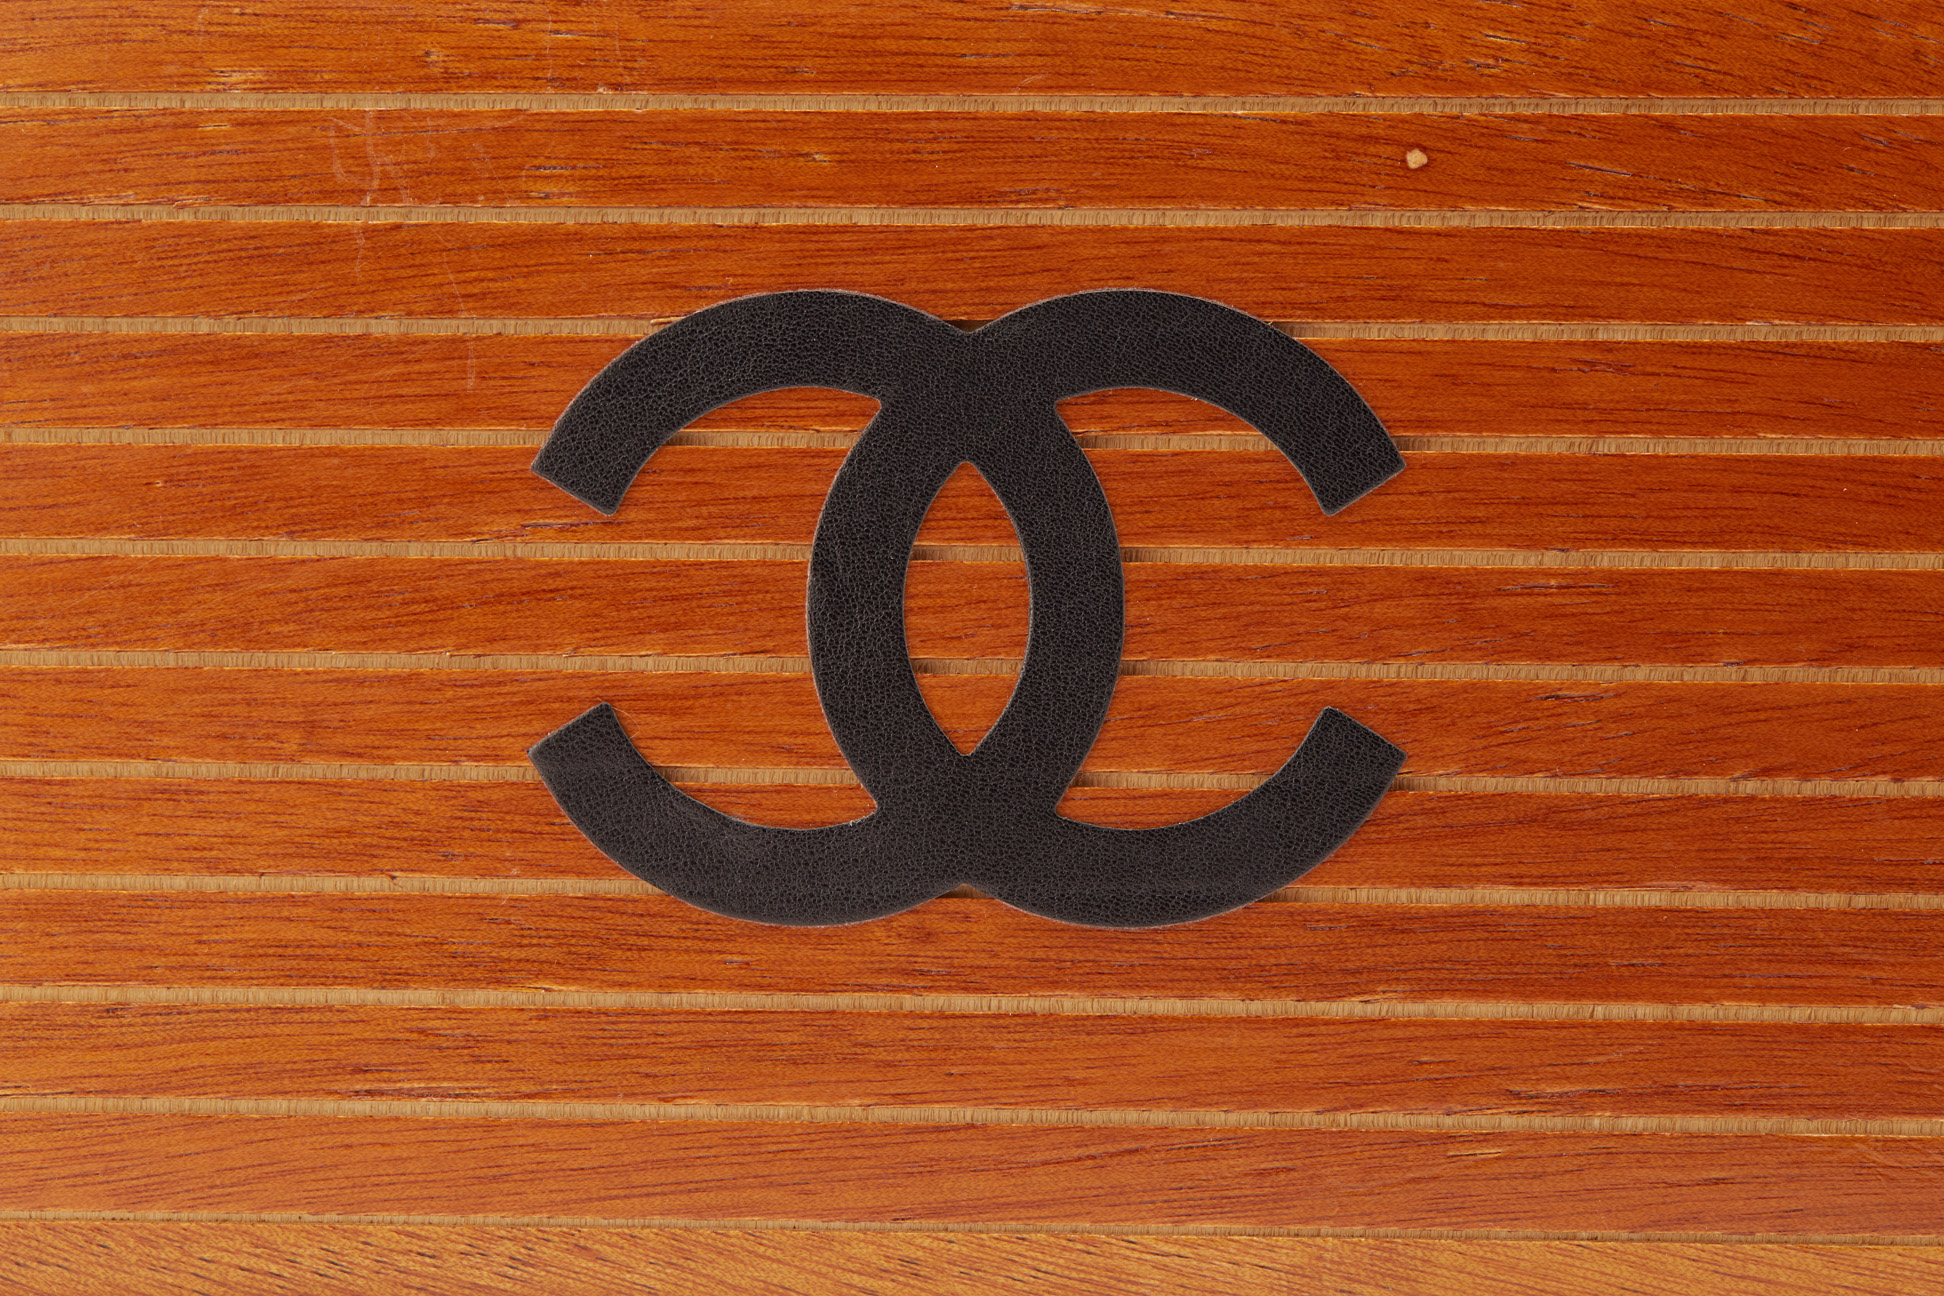 A CHANEL LIMITED EDITION WOOD CRUISE TRUNK BAG - Image 2 of 16